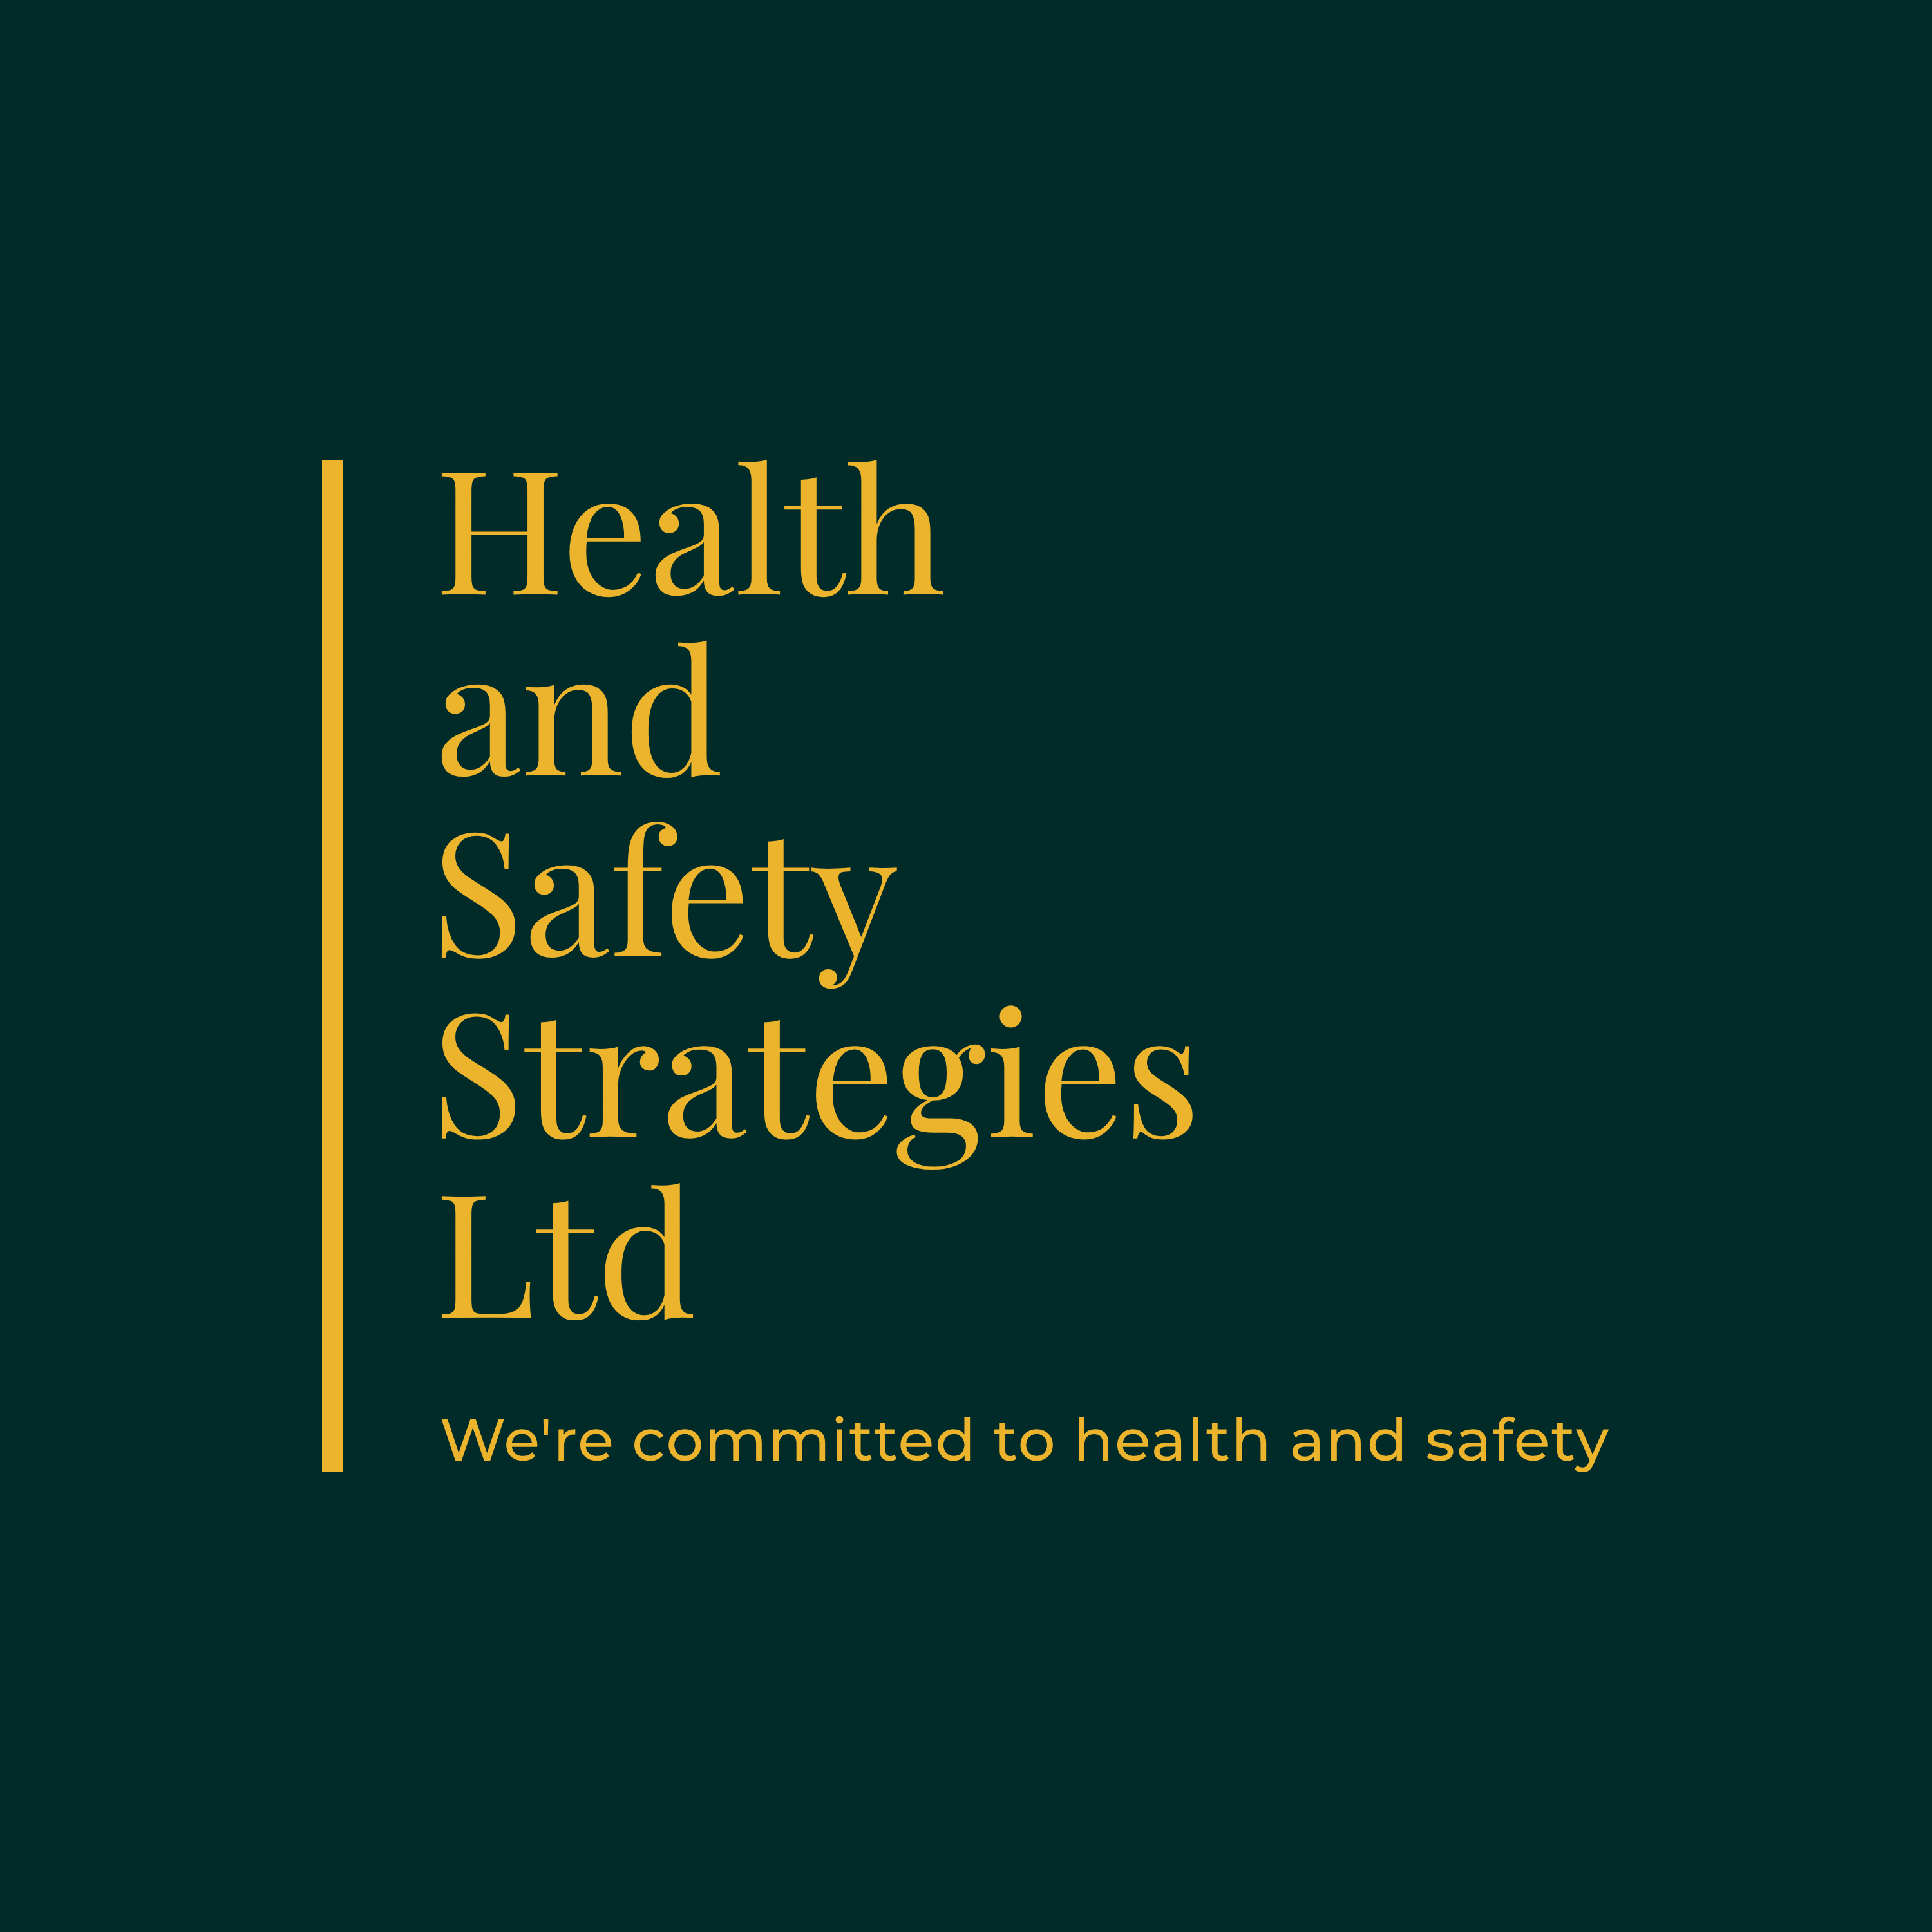 Health and Safety Strategies Ltd